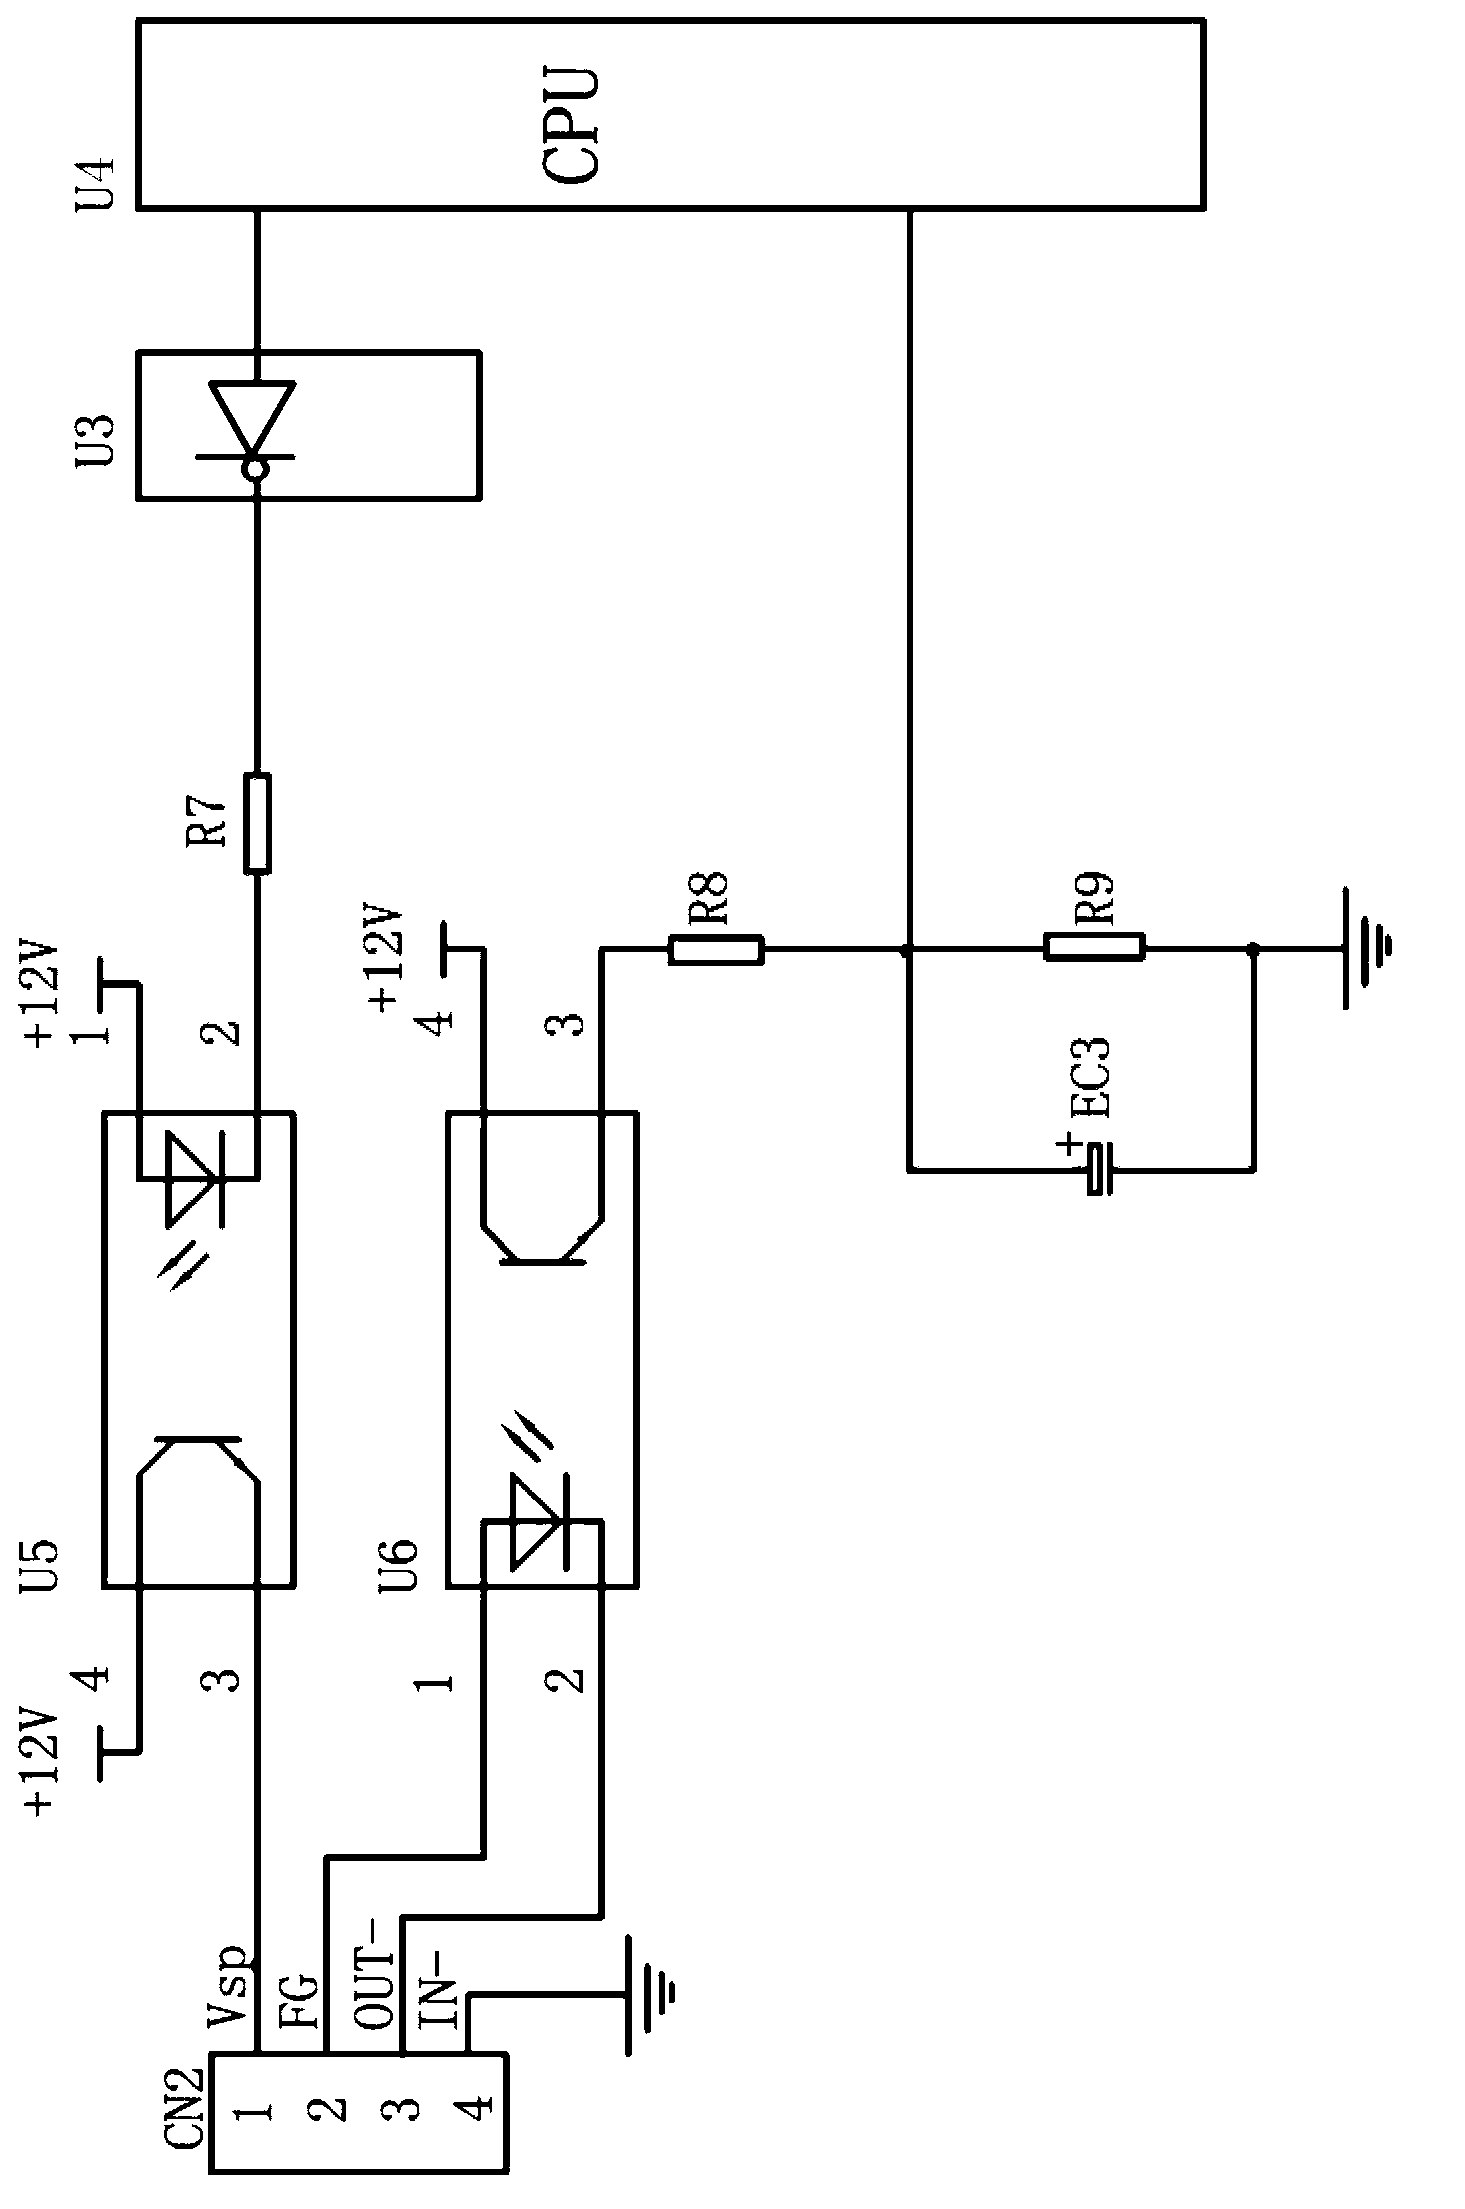 Motor speed regulating voltage Vsp cut-off circuit of air conditioning system of brushless motor